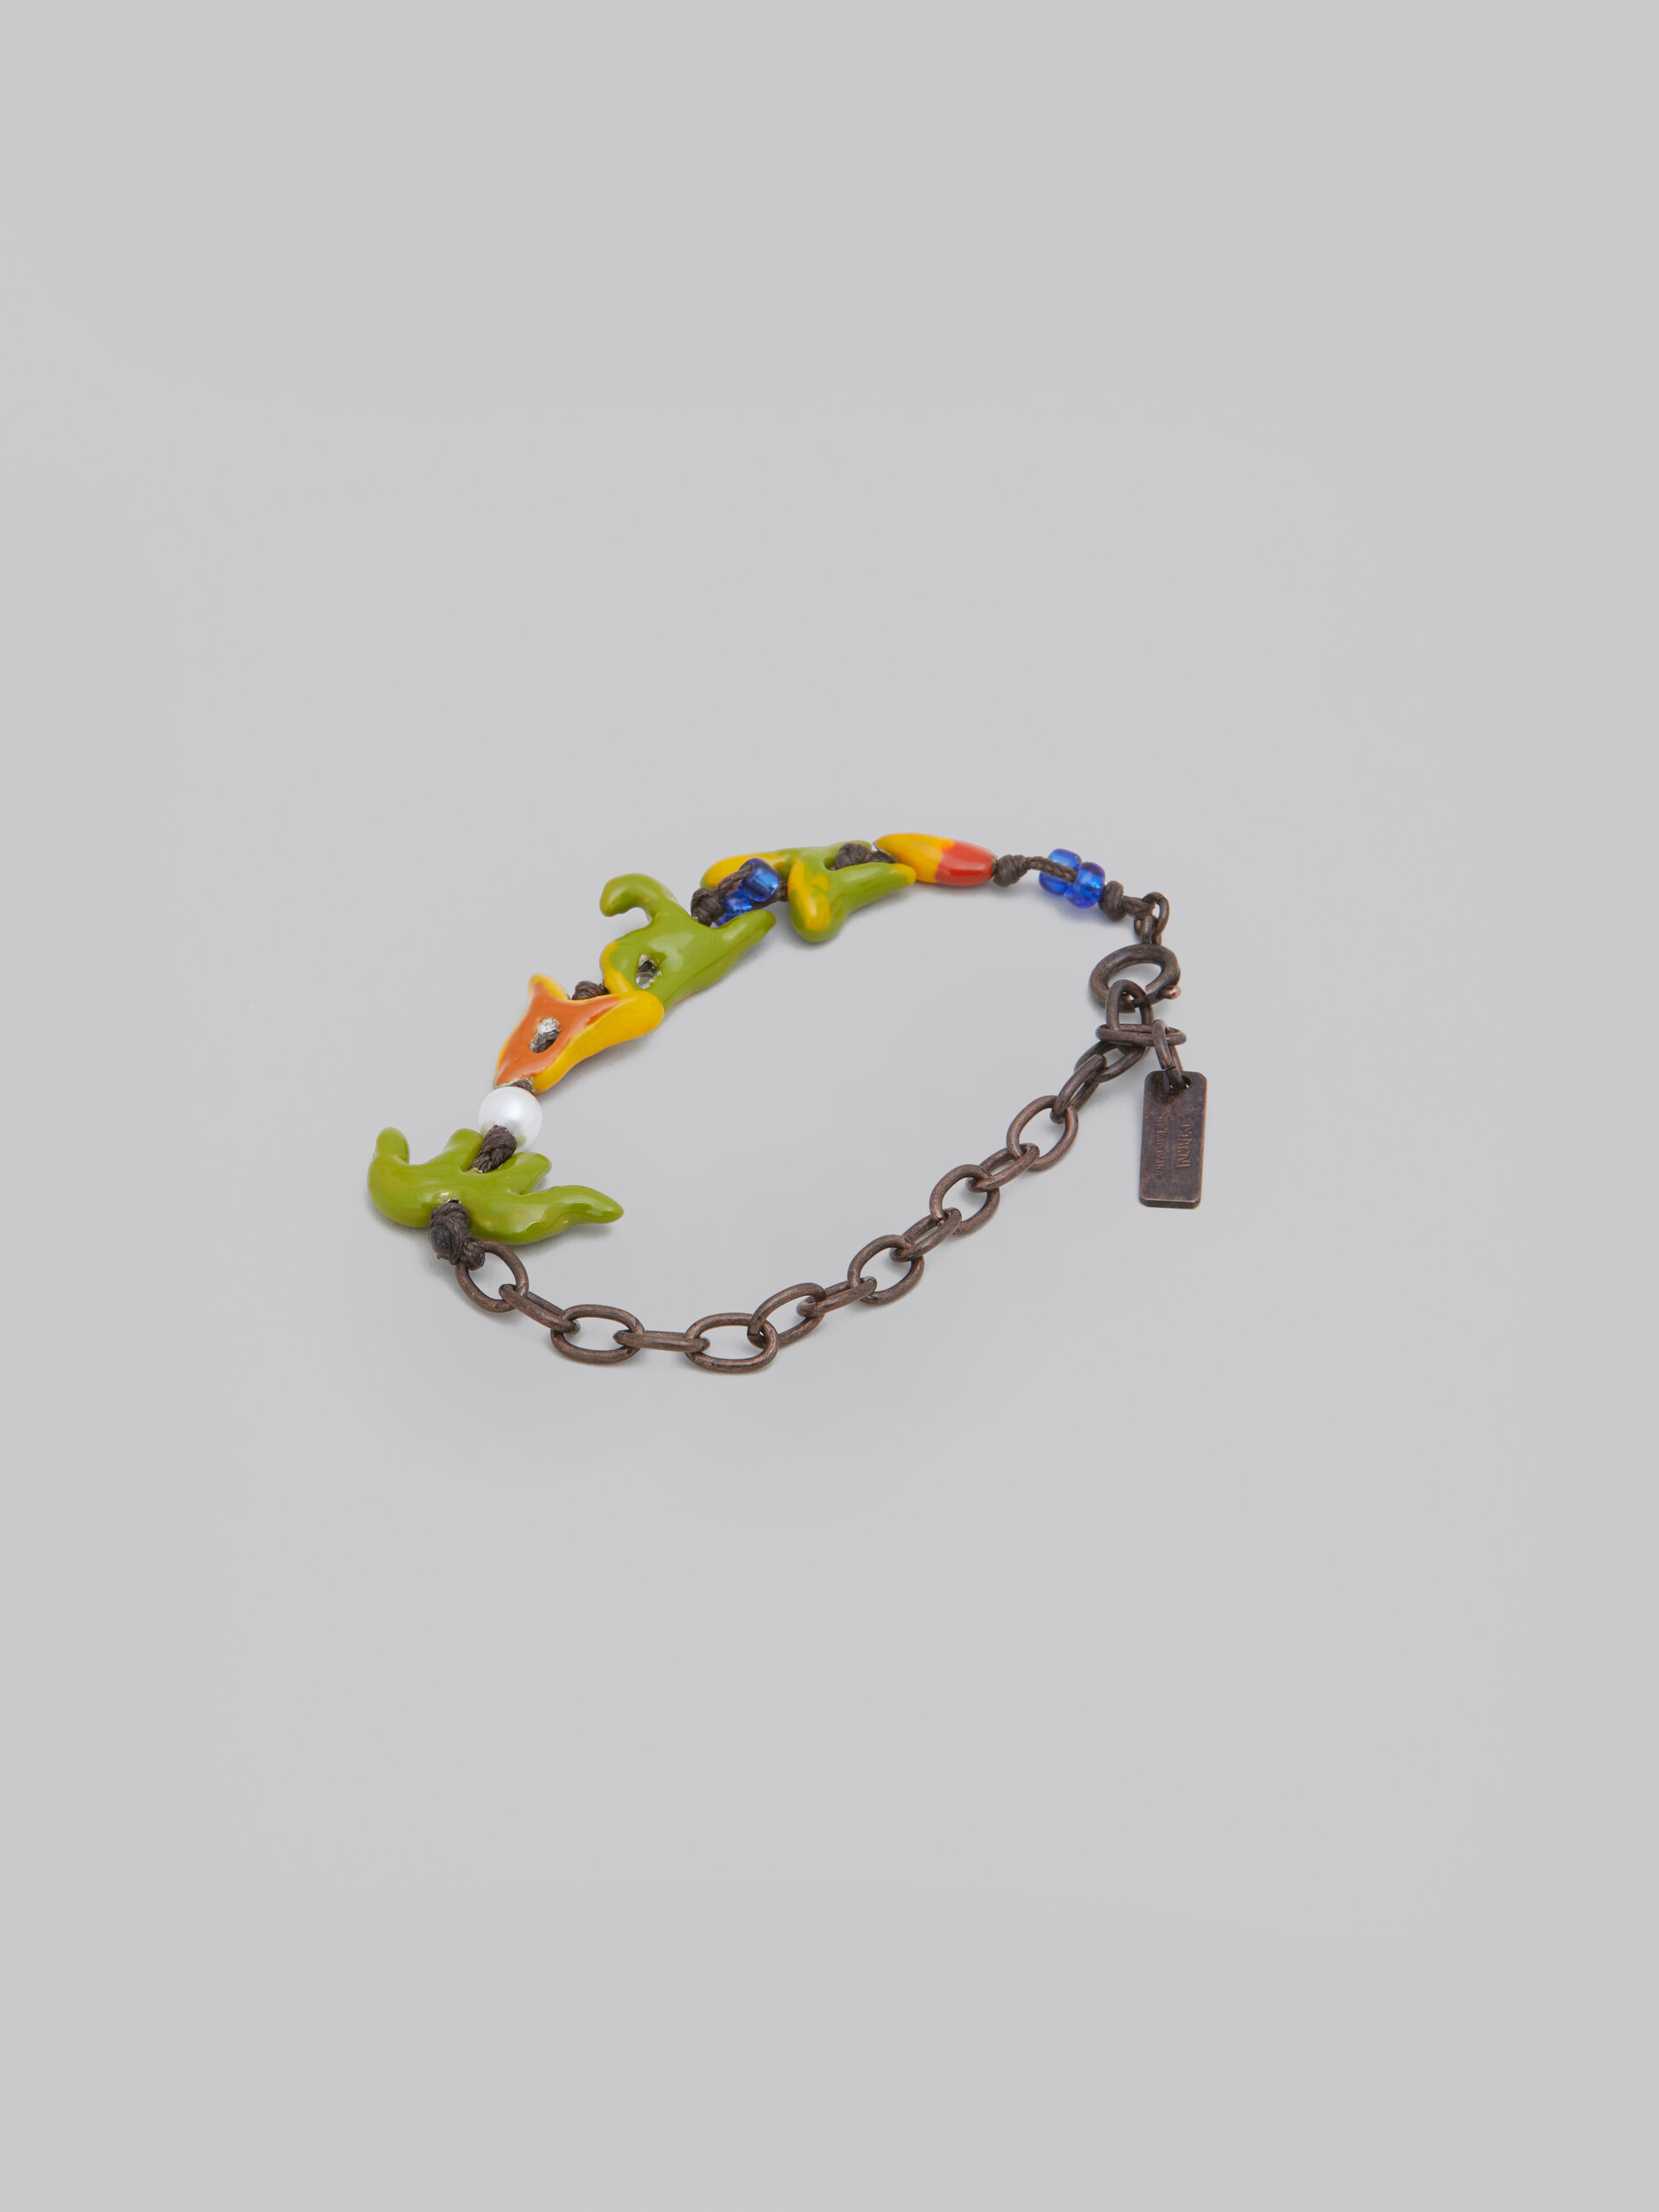 Marni x No Vacancy Inn - Bracelet with green red and yellow pendants - Bracelets - Image 2